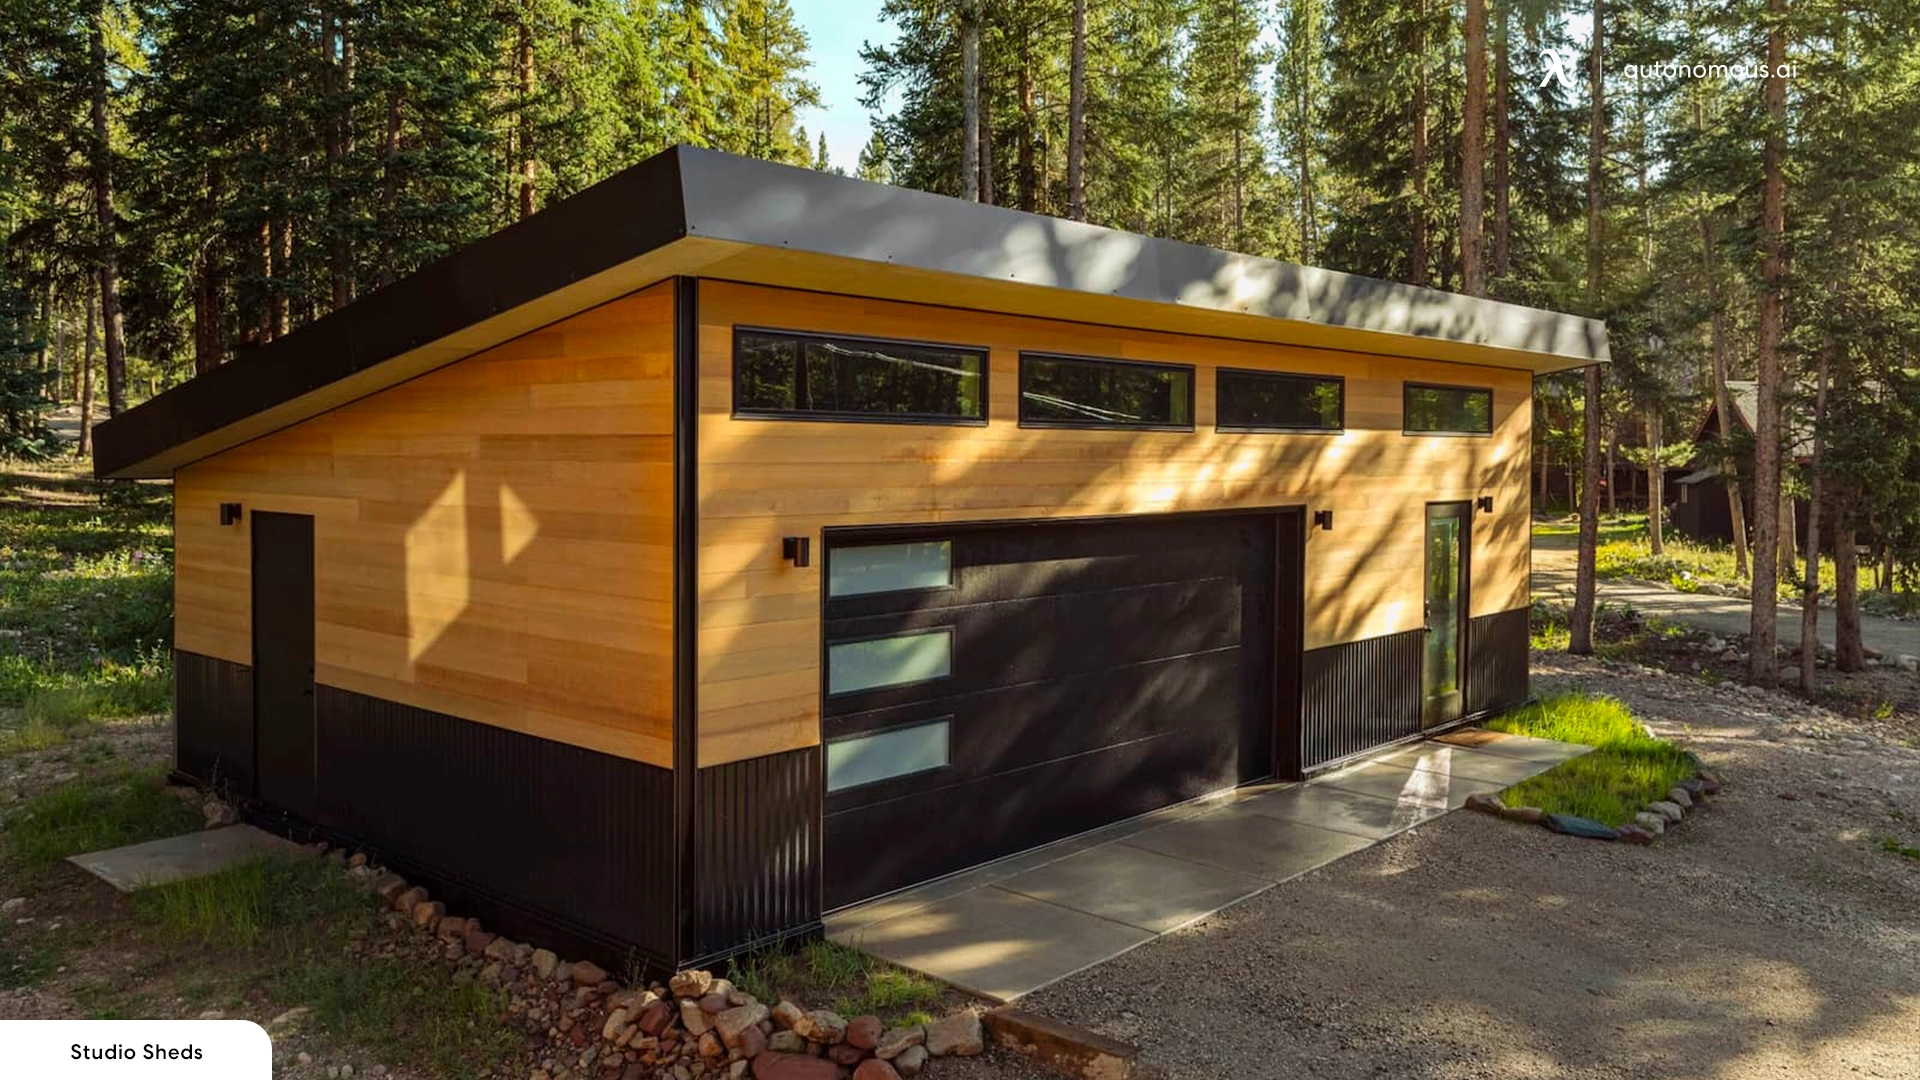 Selecting the Best Spot for the Prefab Garage